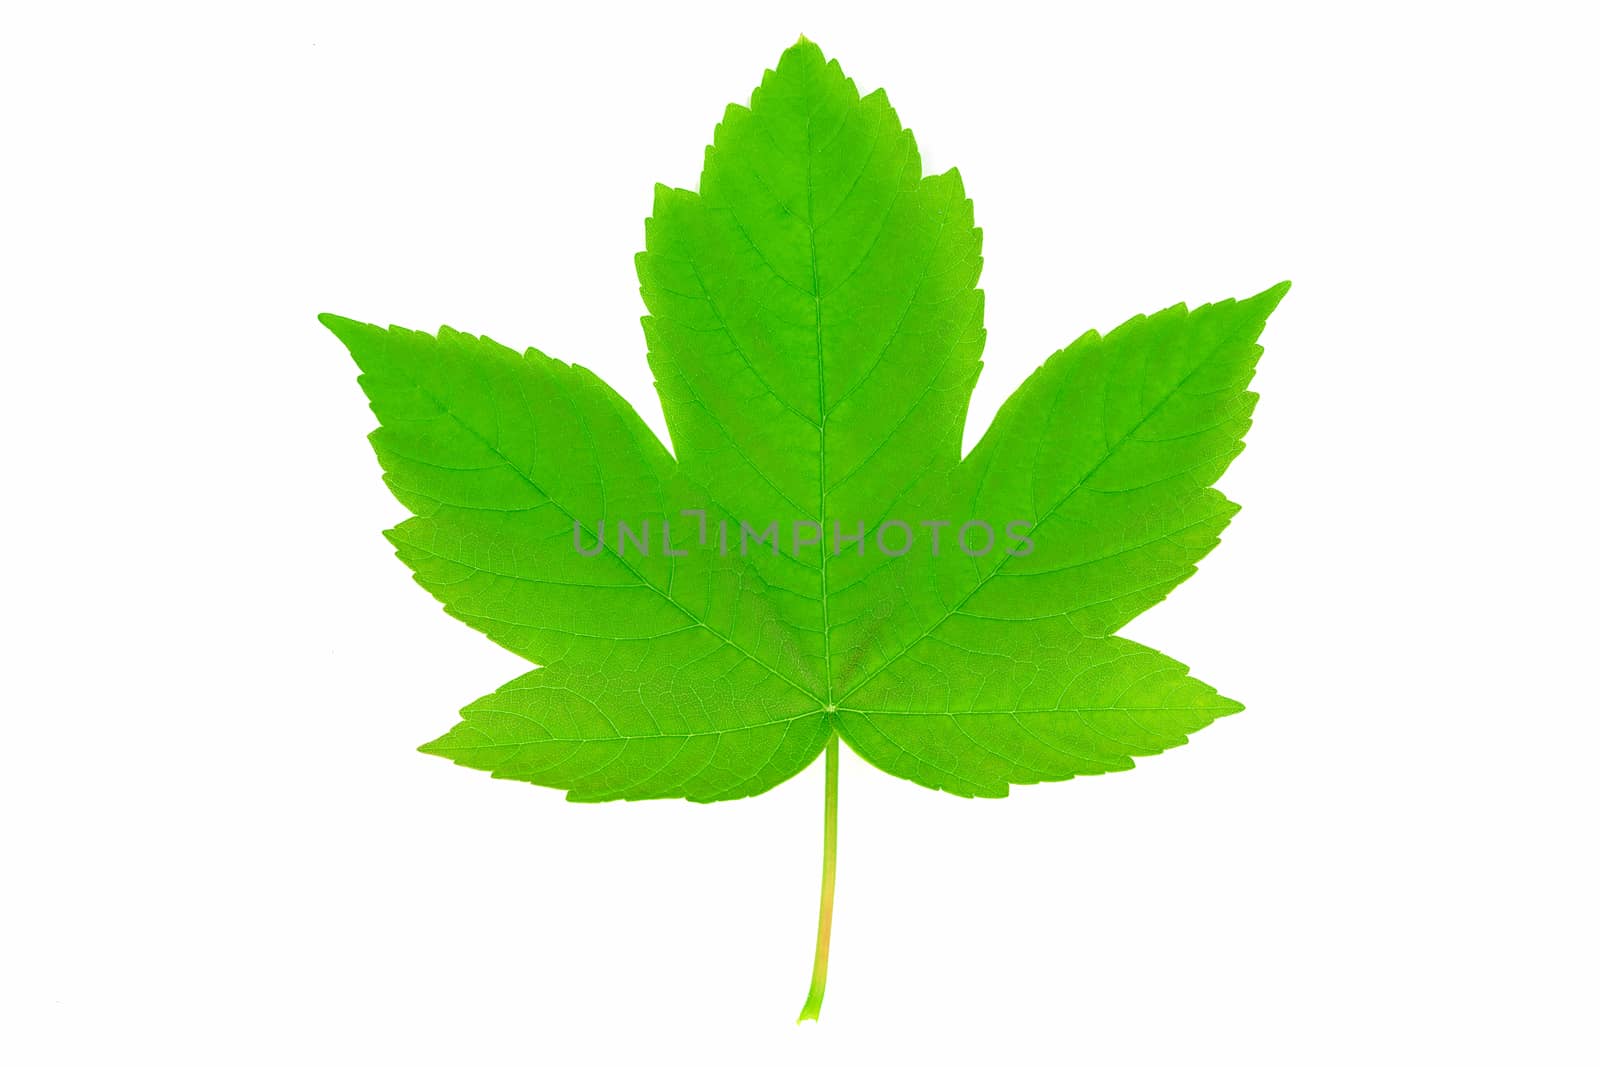 New life and spring time concept - perfect green sycamore maple leaf in close-up (high details)